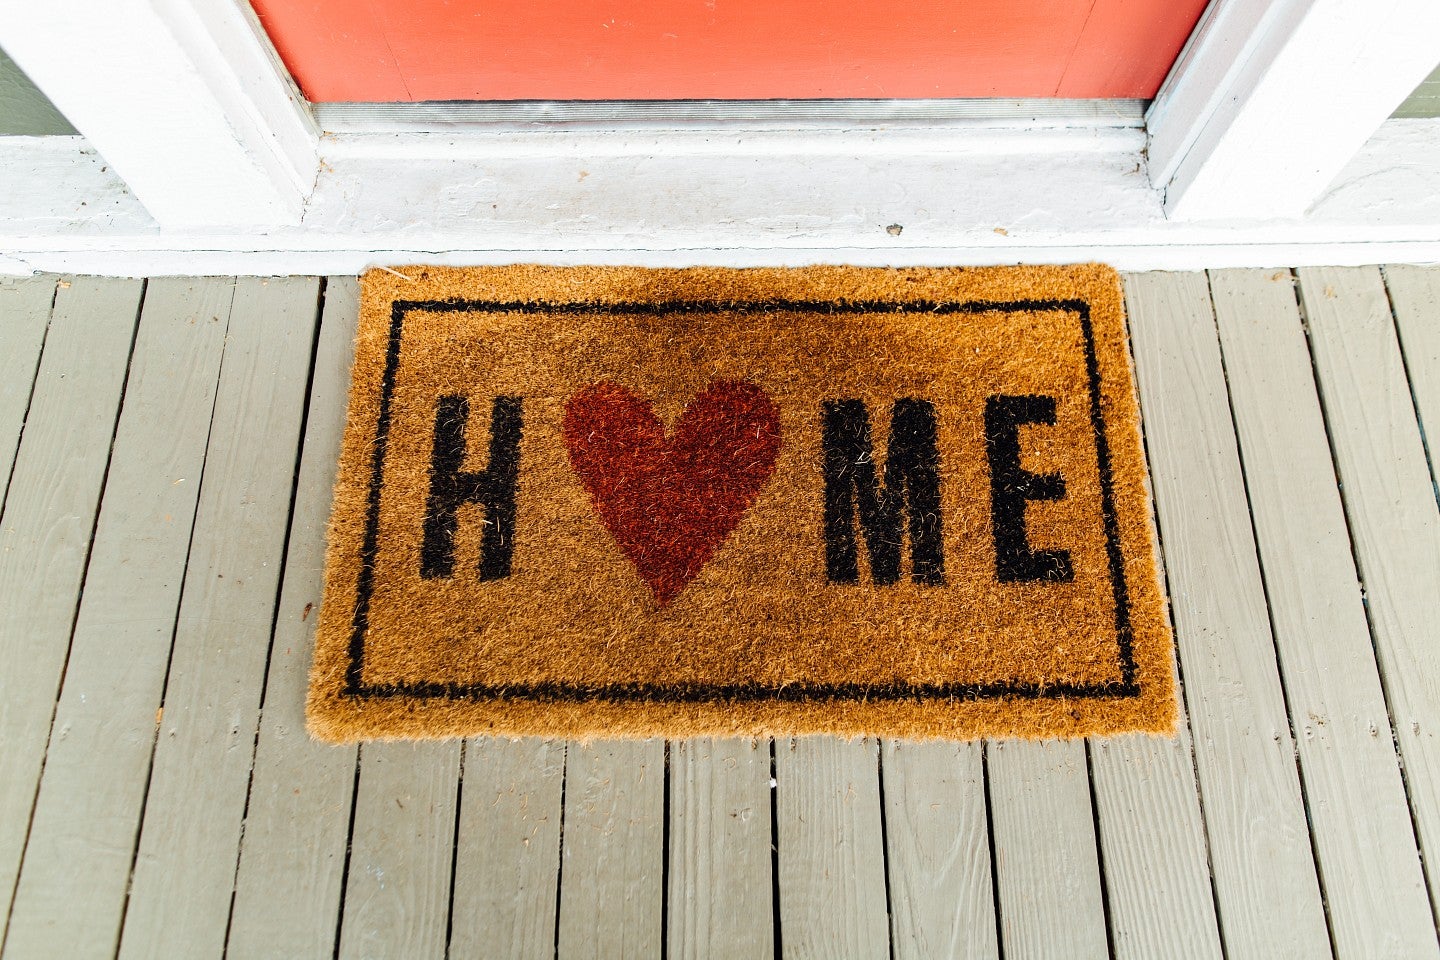 Home doormat with a heart for the "O". Photo by Kelly Lacy from Pexels